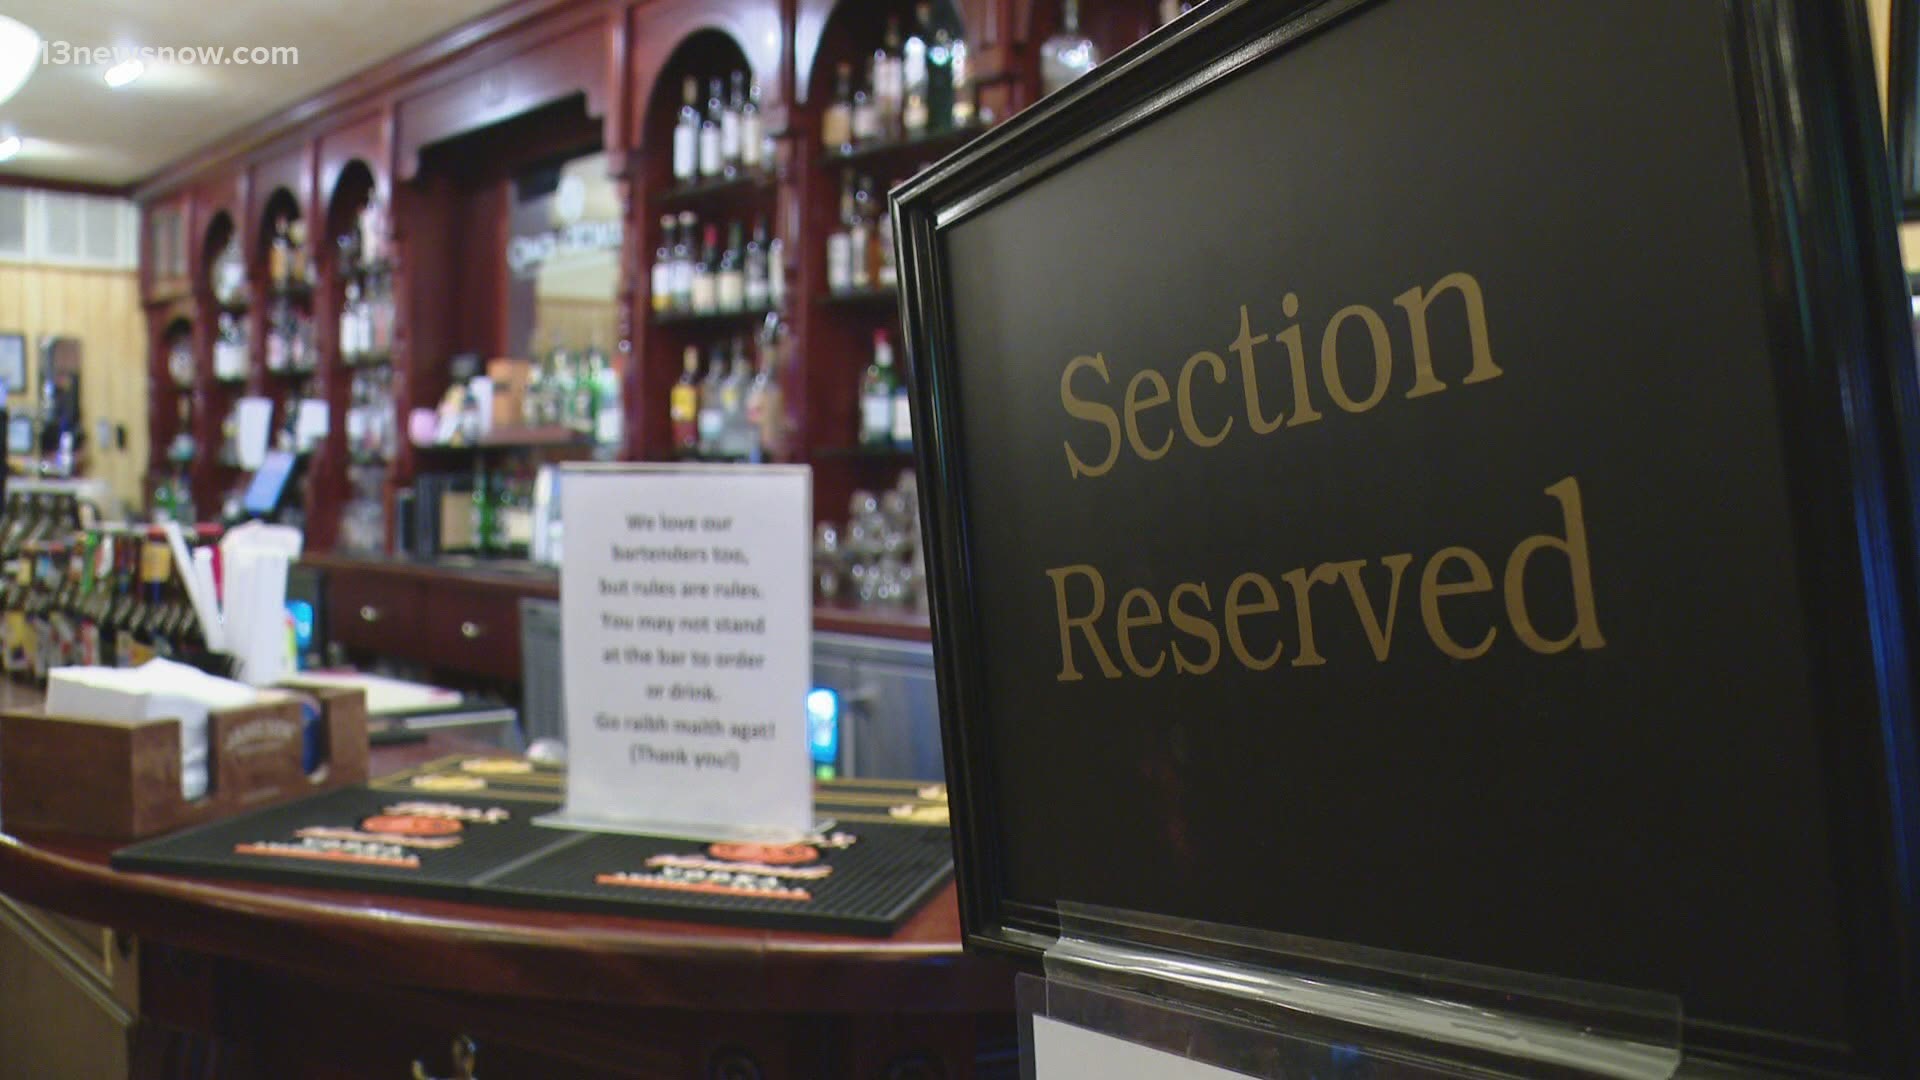 New statewide restrictions go into effect on Monday. Bars and restaurants in Virginia Beach and across Hampton Roads are bracing for the impact.